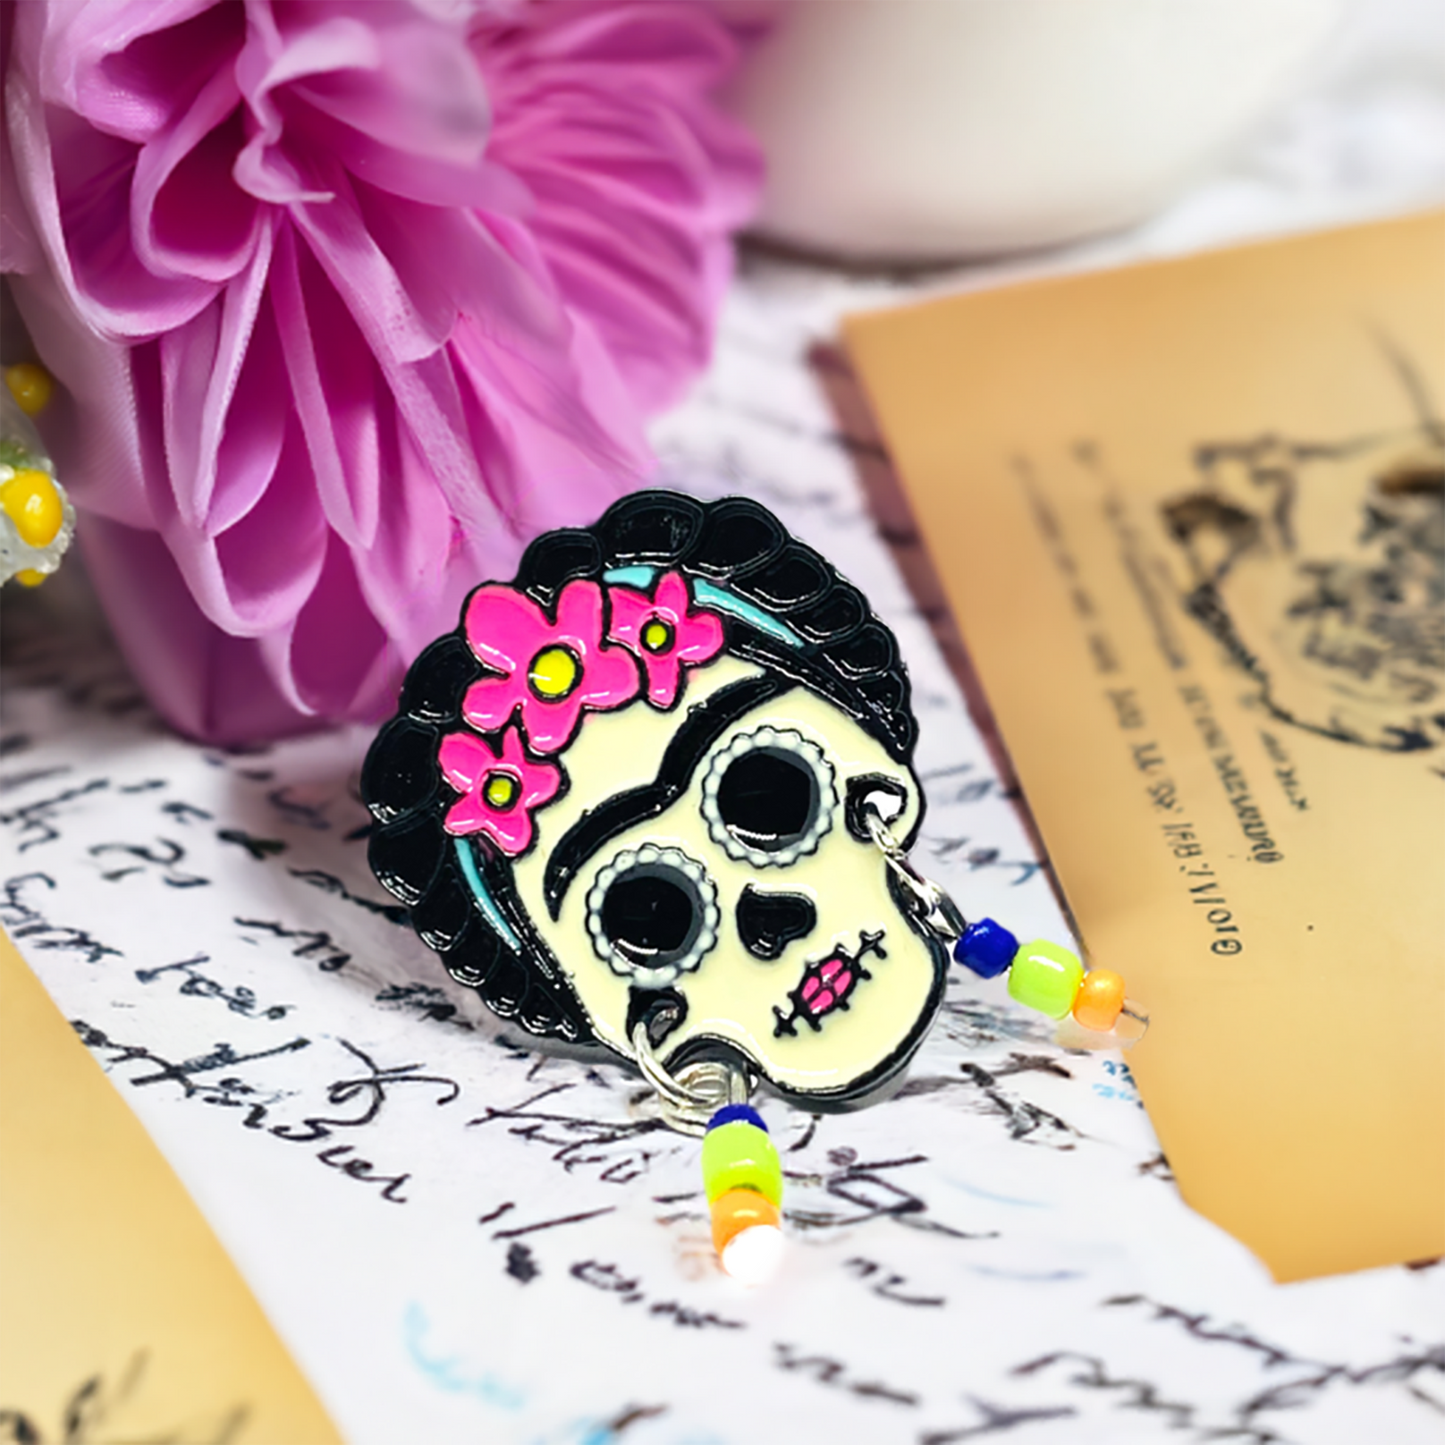 Cute Frida Kahlo enamel pin Day of the dead with beaded earrings. Cute, colorful, and original.